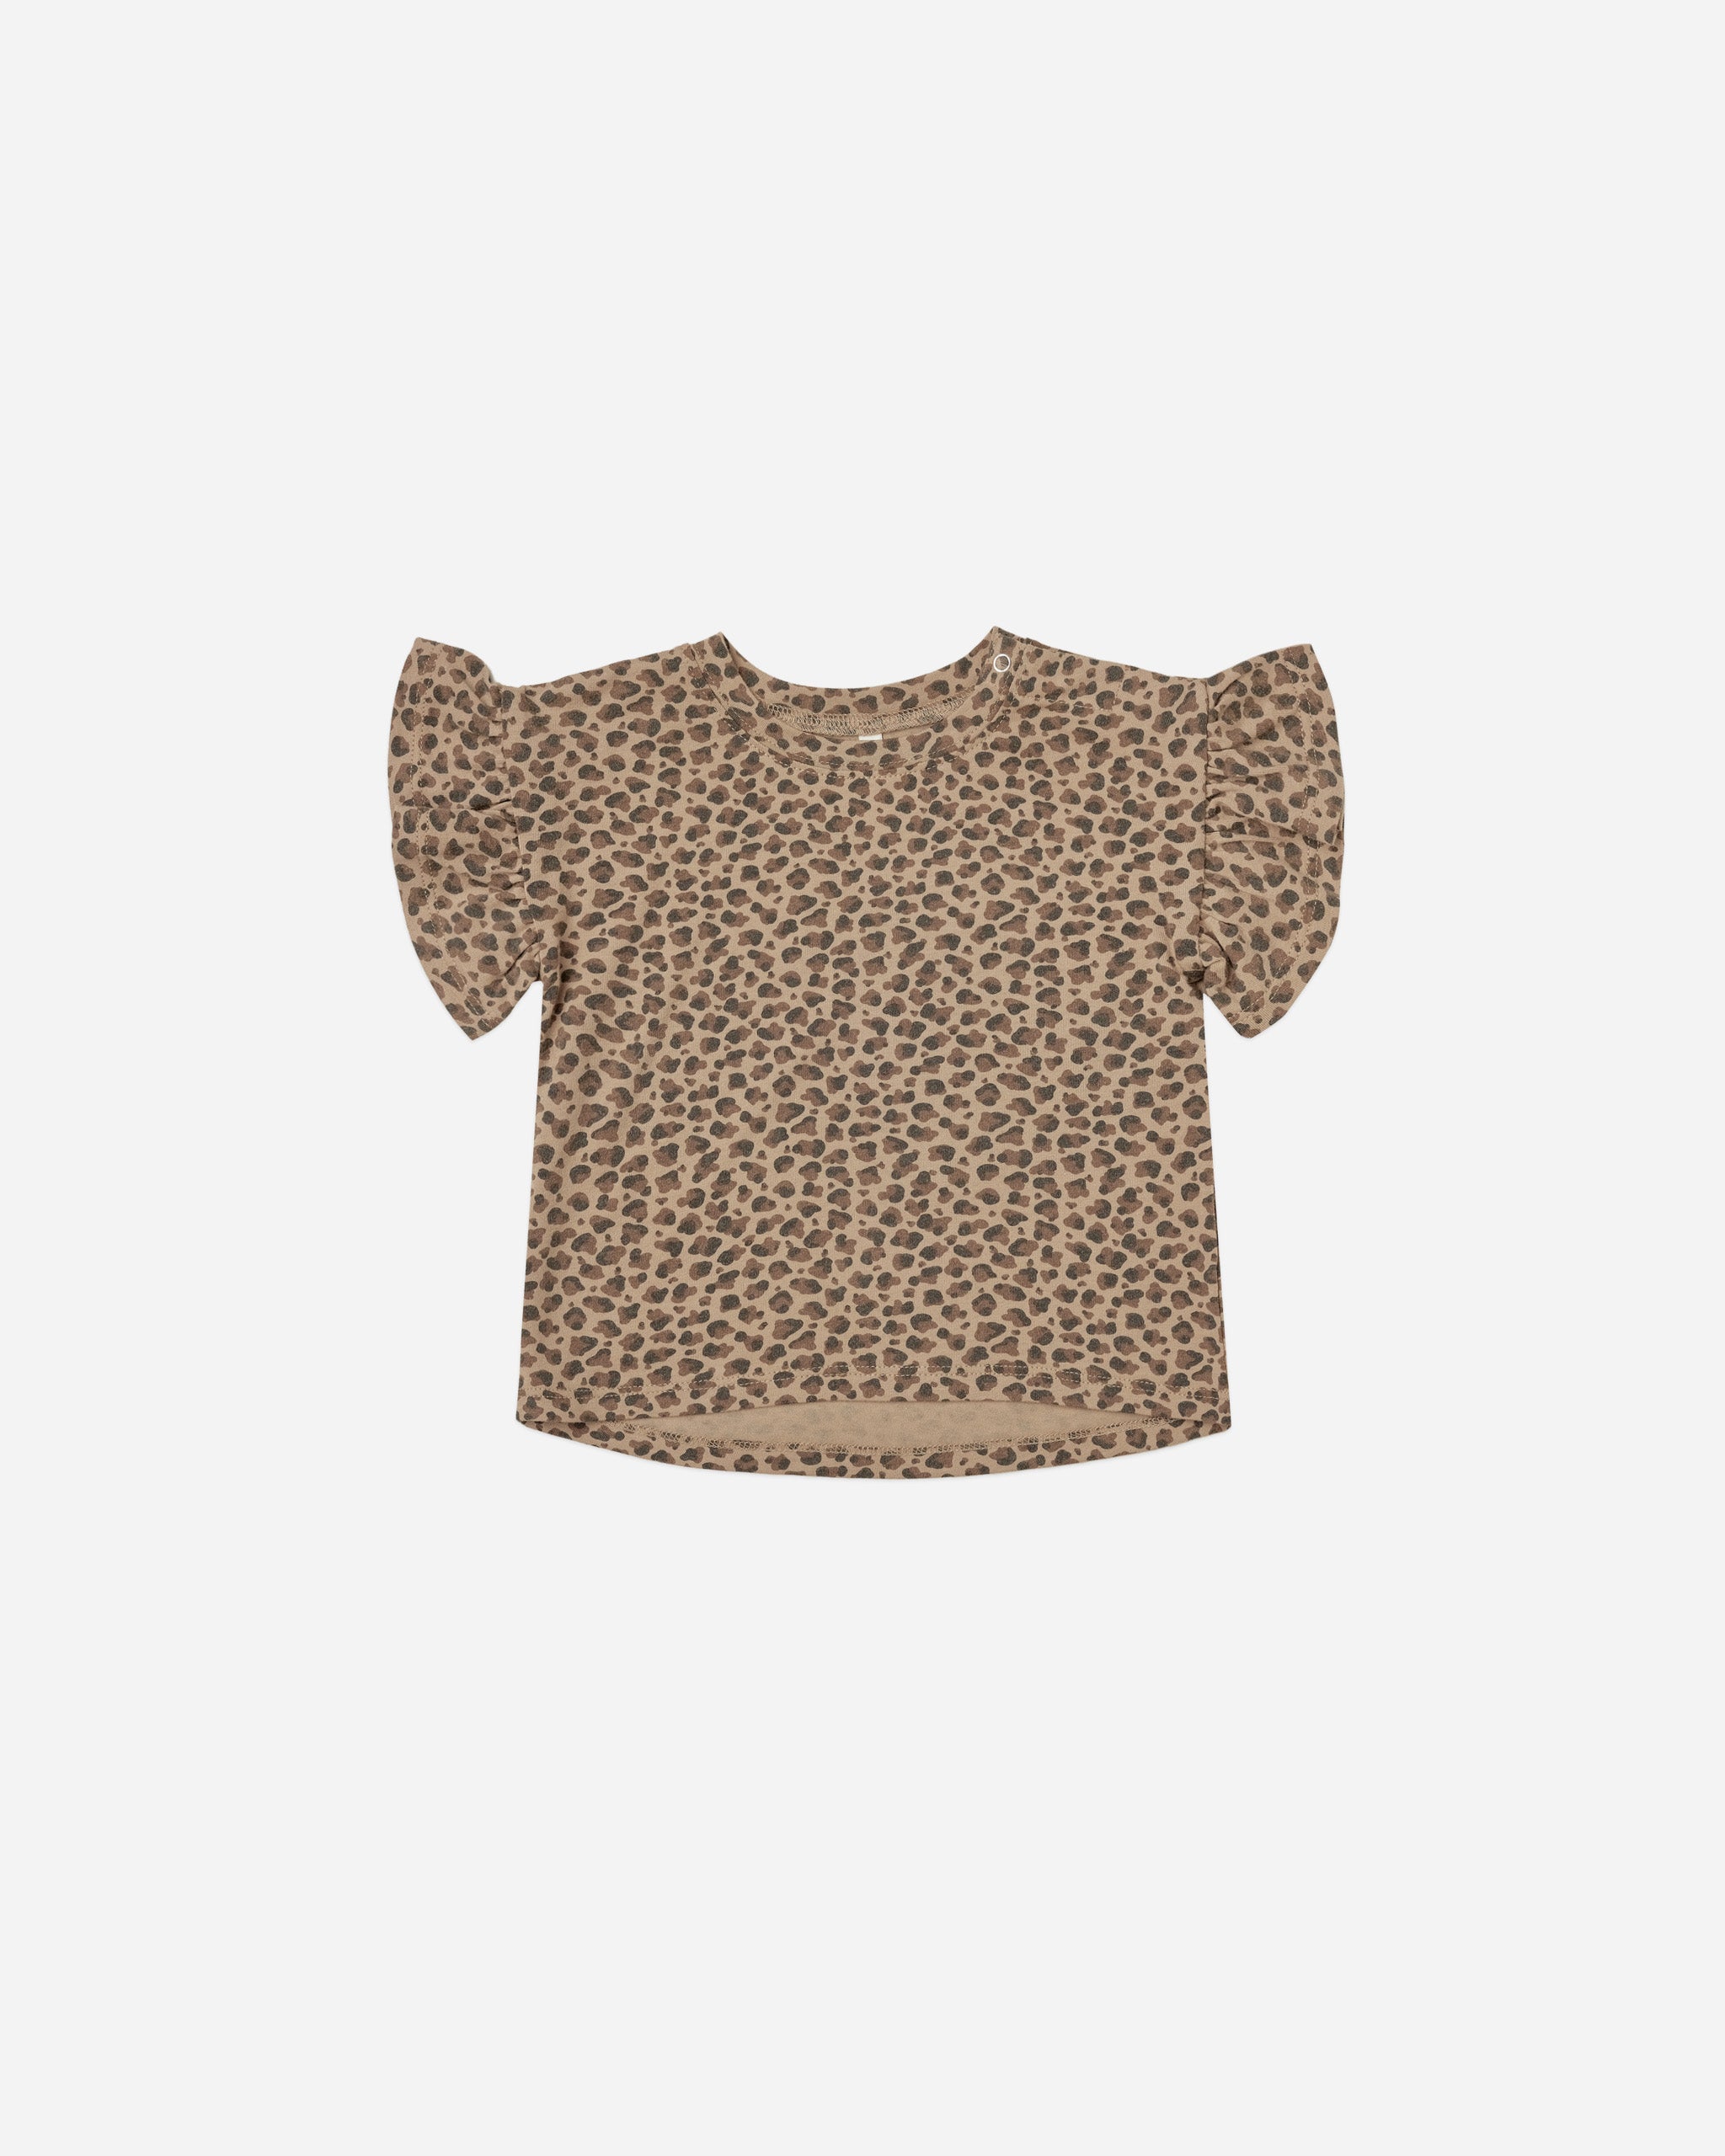 flutter tee || cheetah print - Rylee + Cru | Kids Clothes | Trendy Baby Clothes | Modern Infant Outfits |